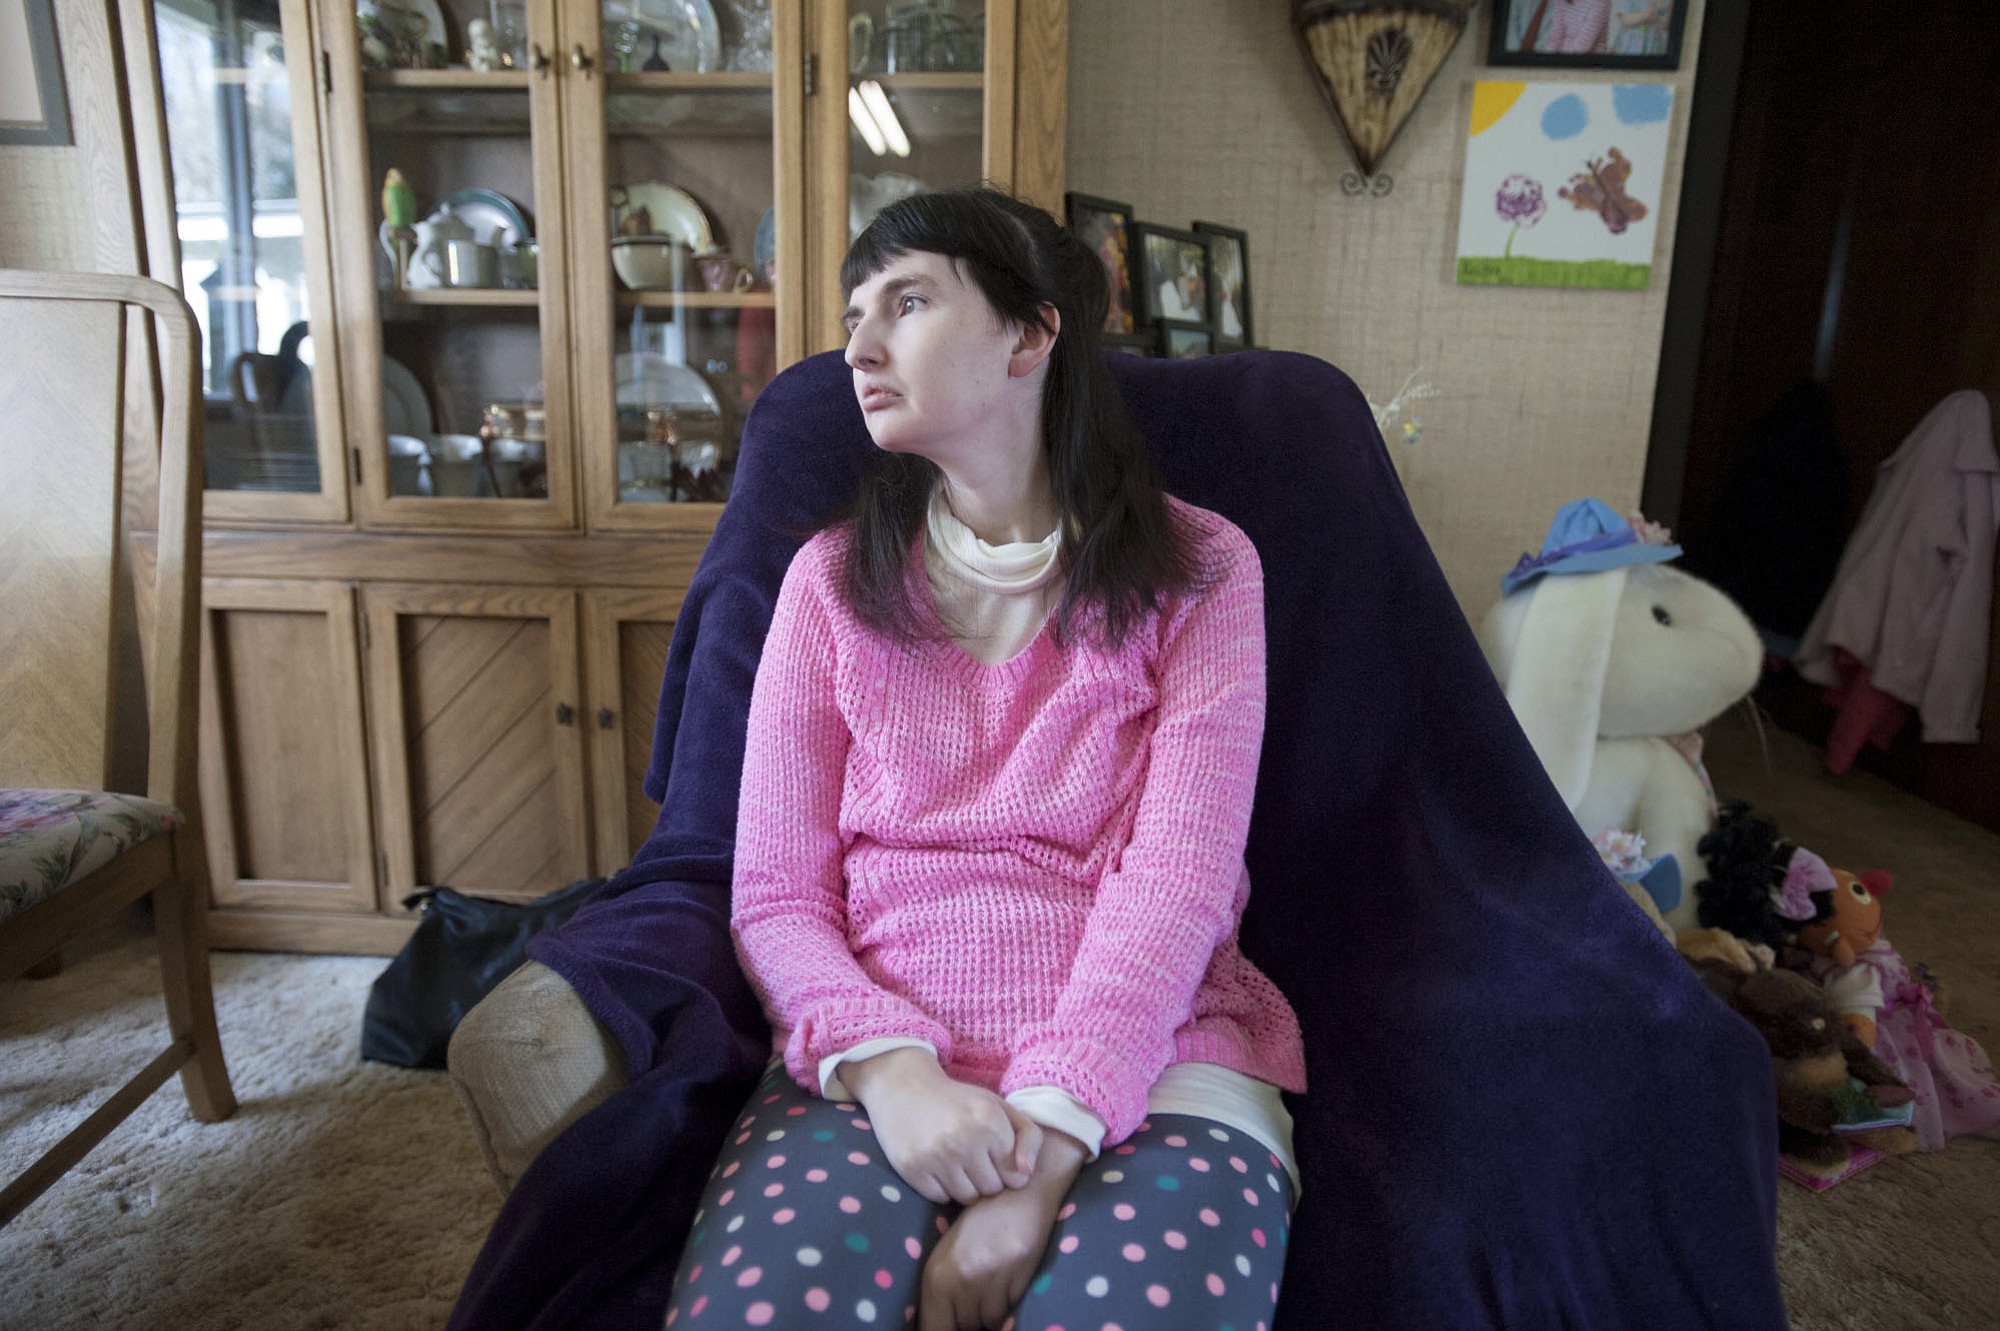 Courtney Lightheart, 26, of Washougal suffers from Rett Syndrome.